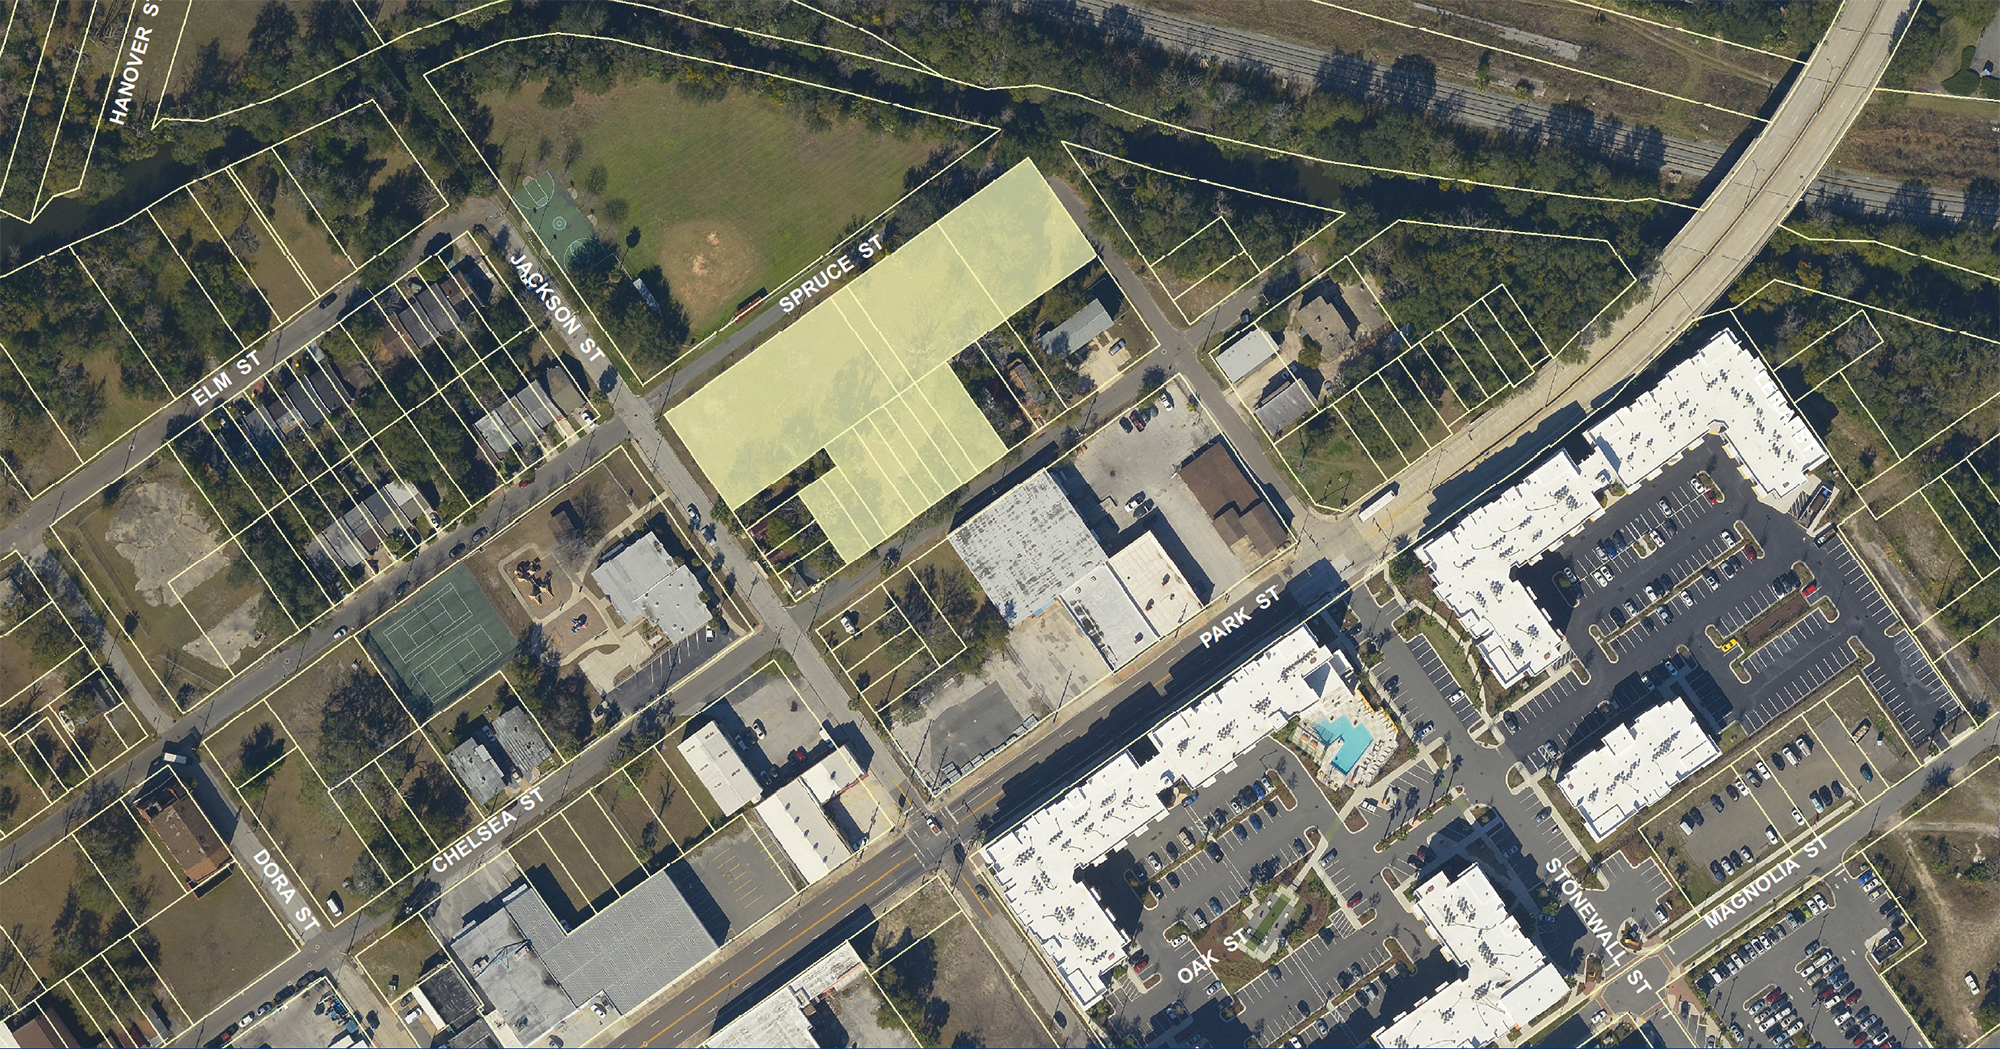 Vestor is planning multifamily housing for a 1.16-acre site along Spruce Street between Jackson and Stonewall streets.